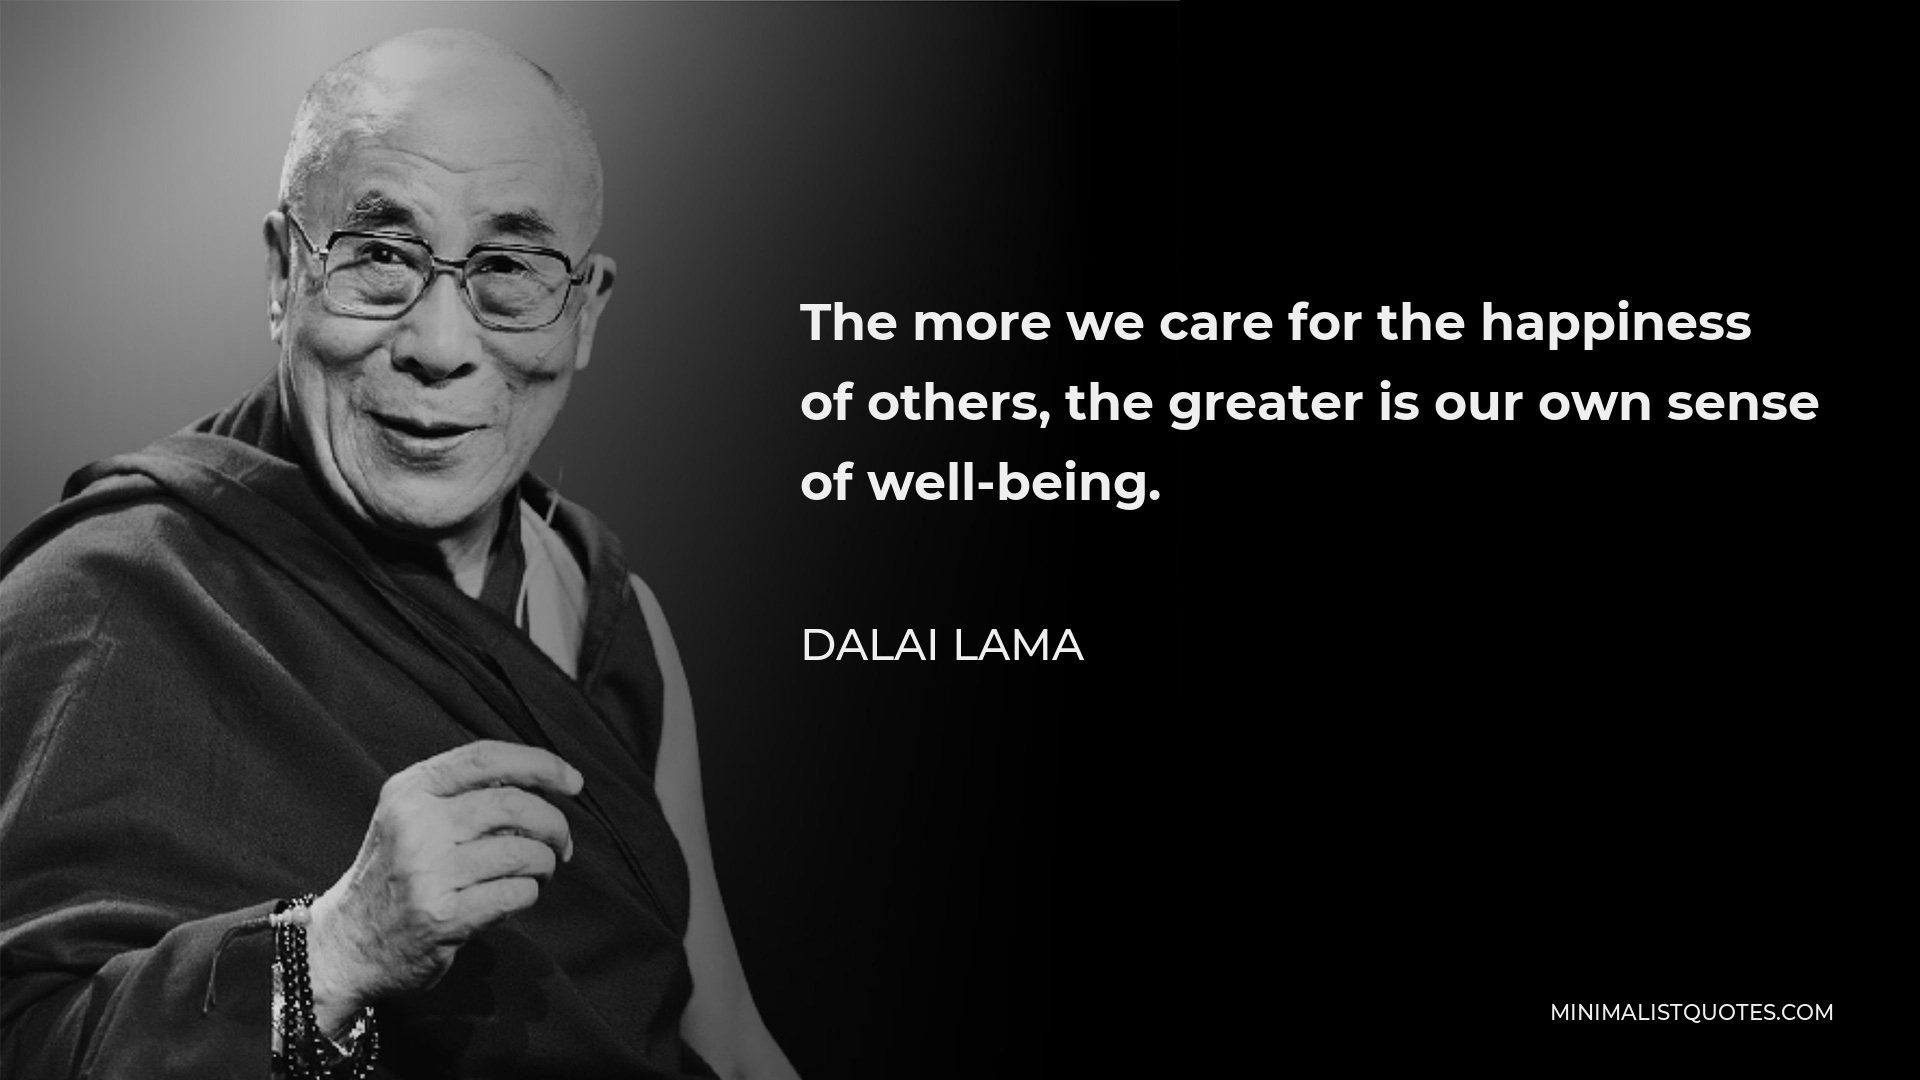 Dalai Lama Quote - The more we care for the happiness of others, the greater is our own sense of well-being.